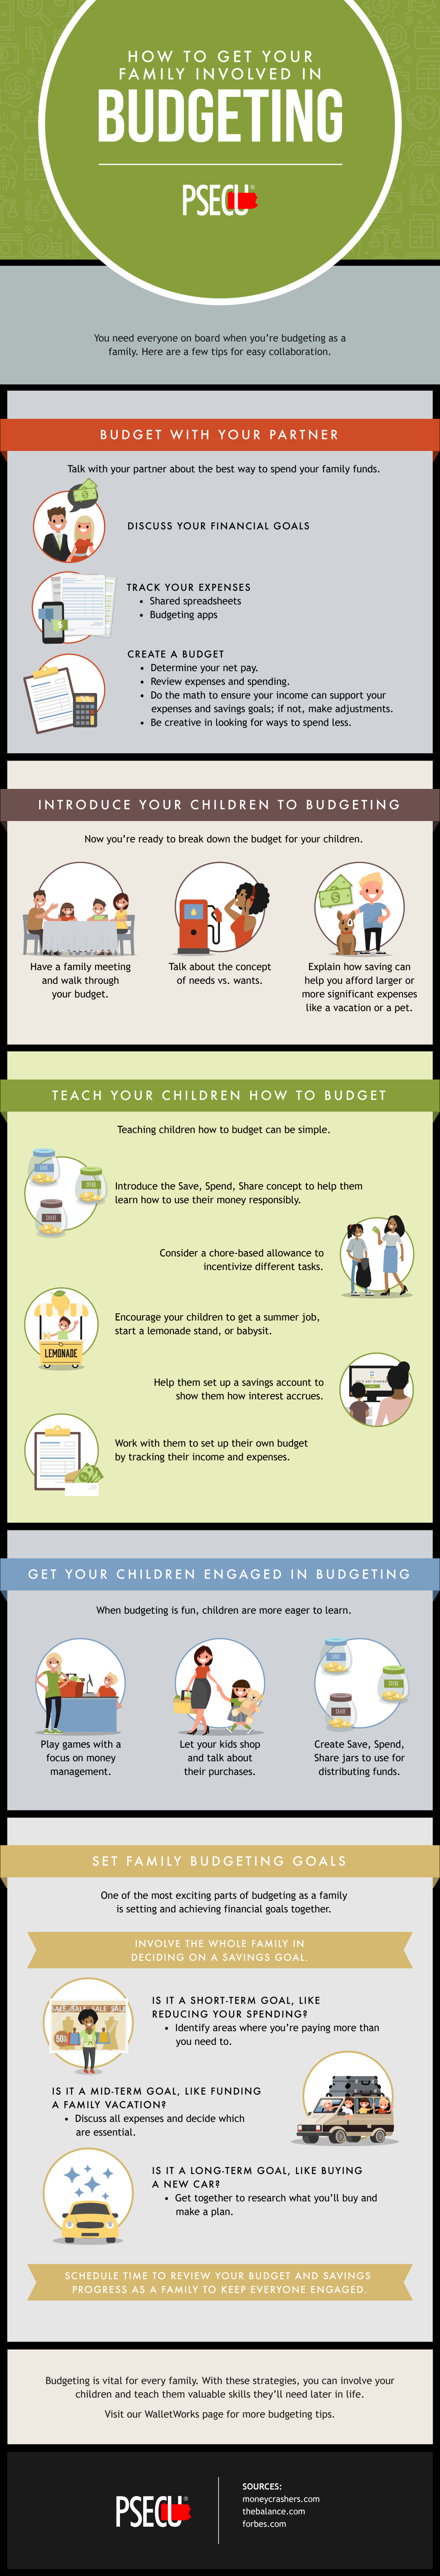 Picture of: How to Get Your Family Involved in Budgeting